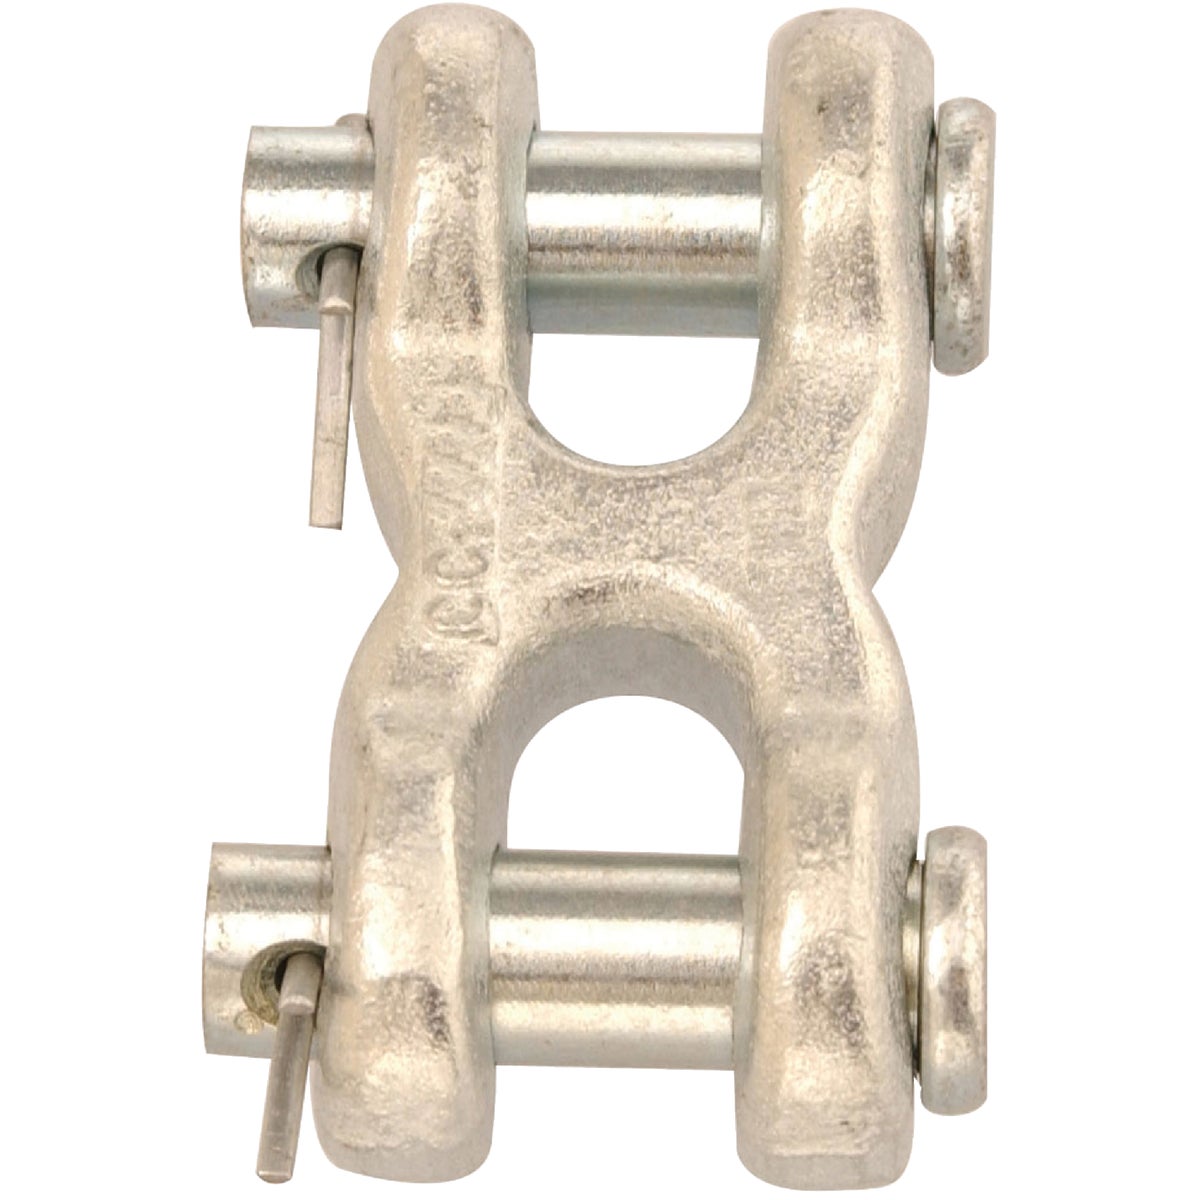 Item 736564, Durable forged steel mid link.